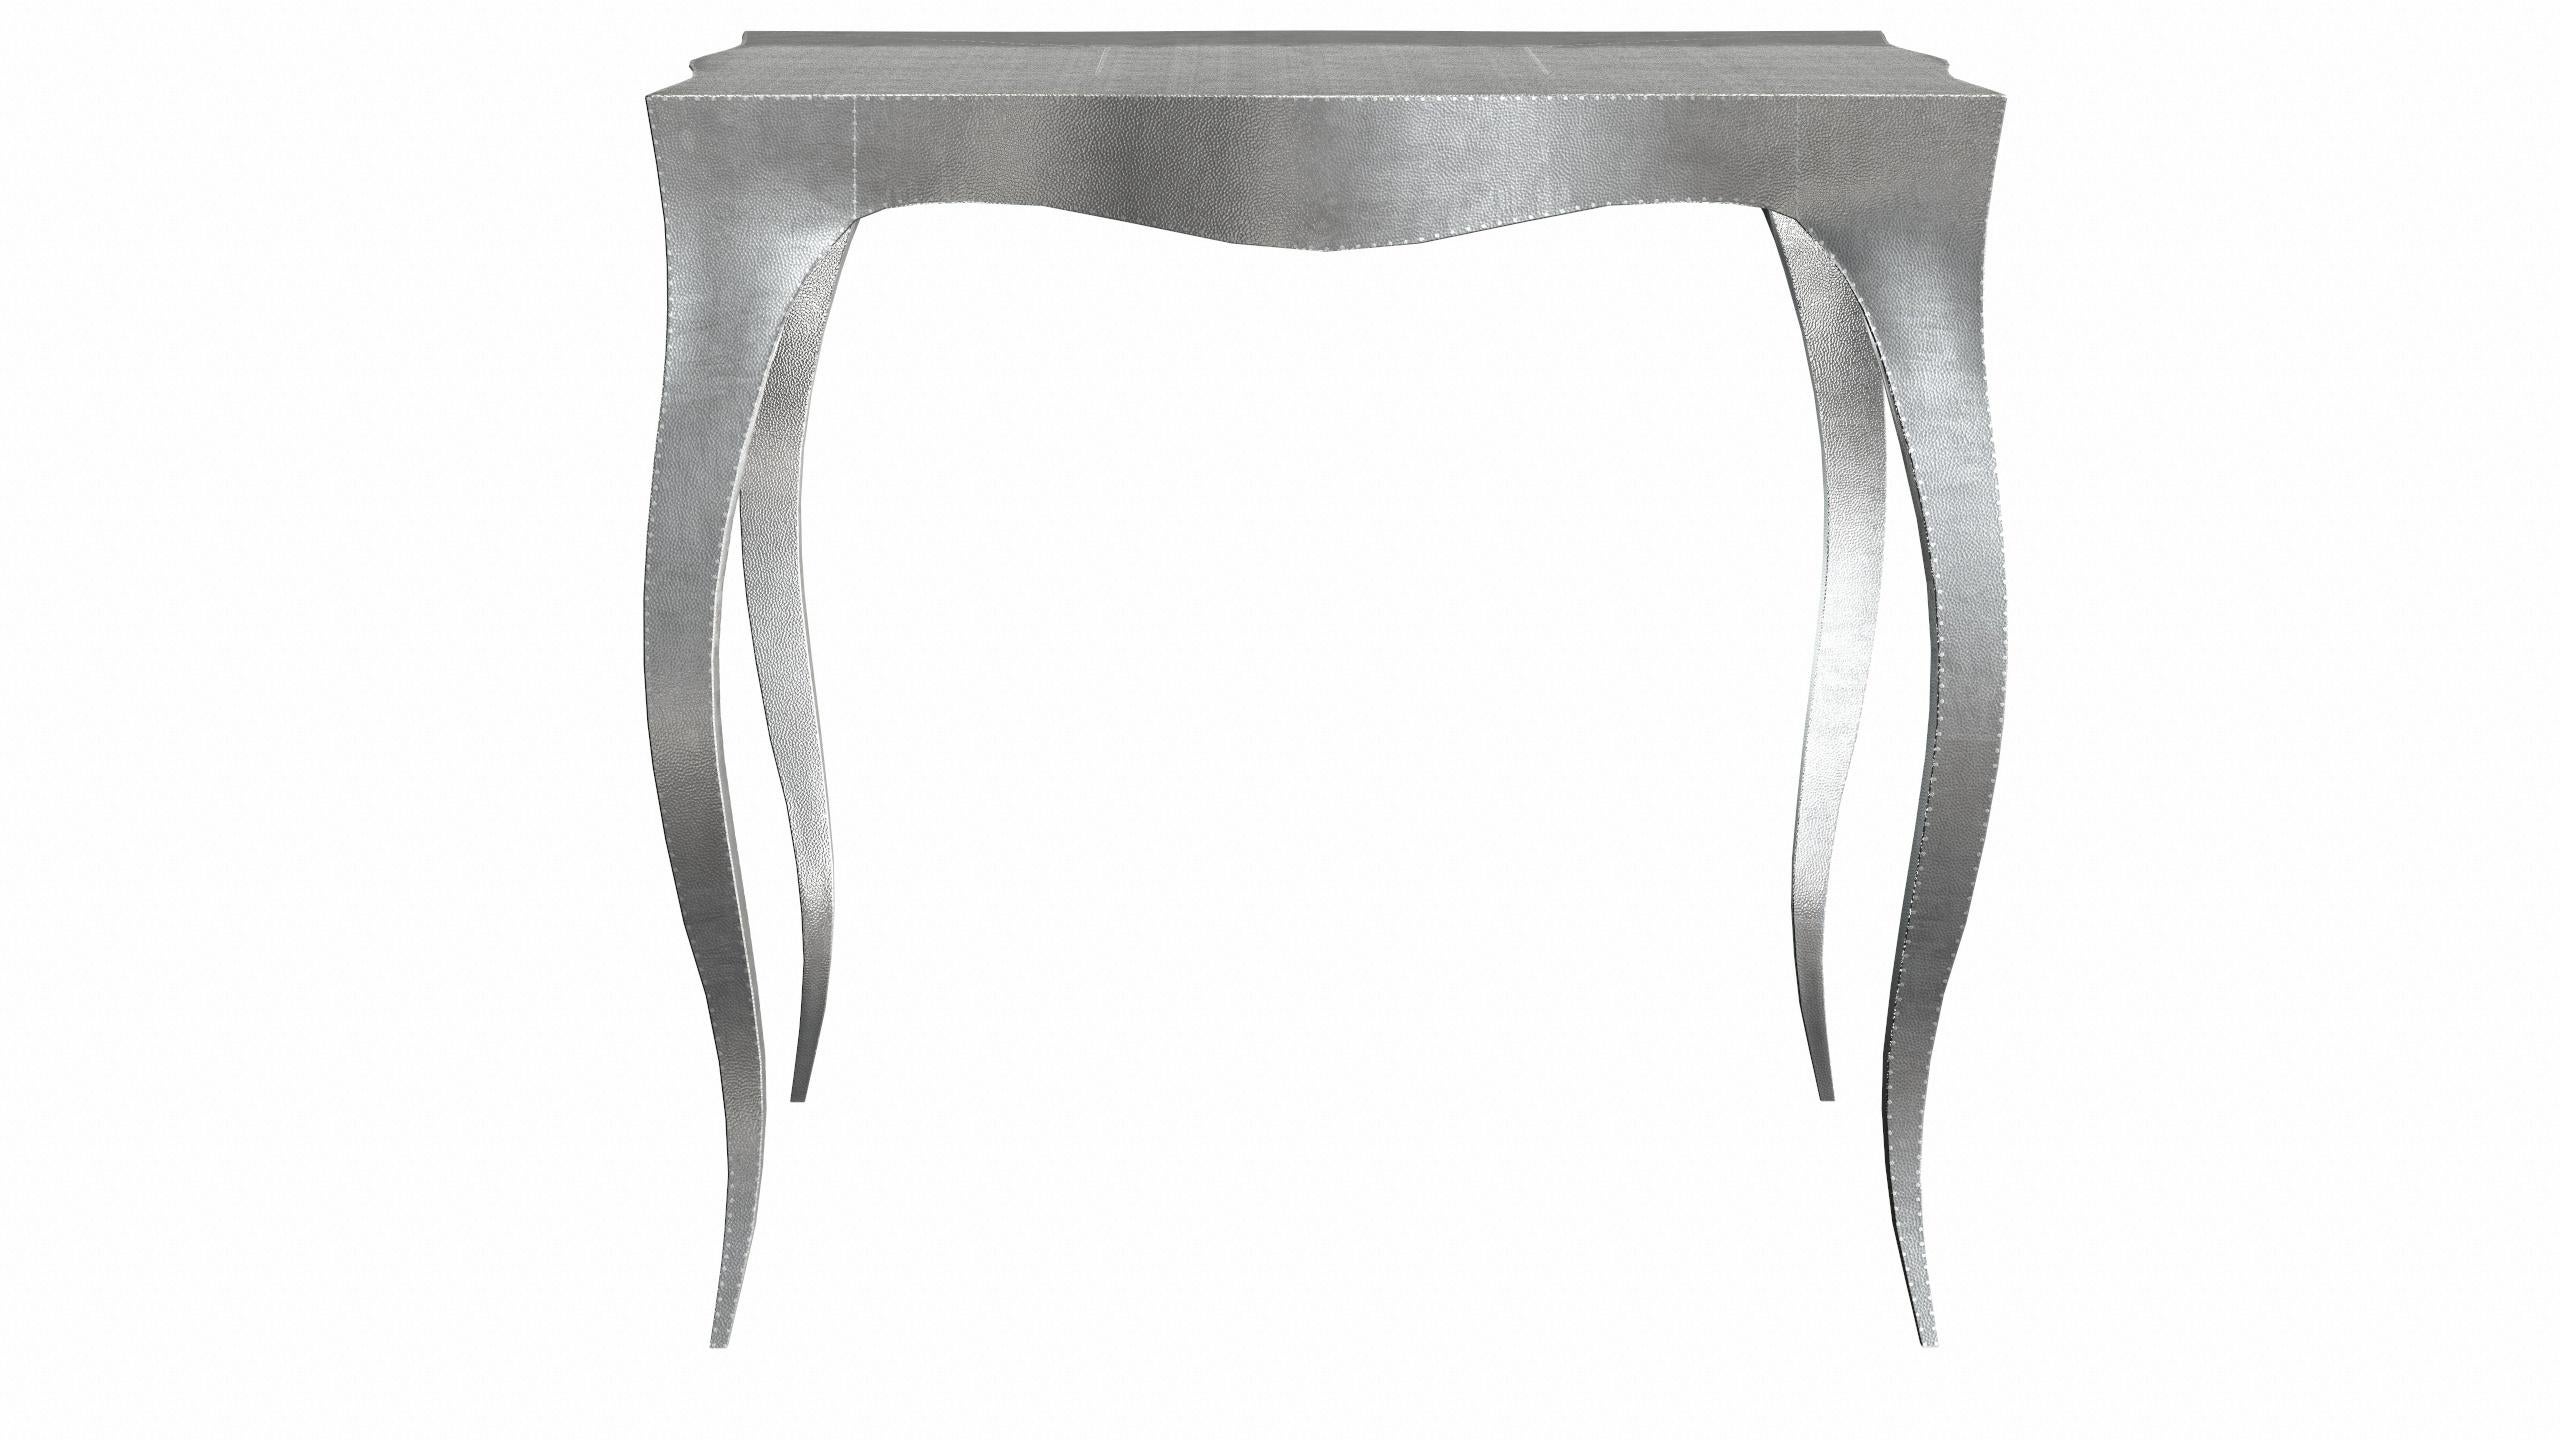 American Louise Art Deco Vanities Table Mid. Hammered White Bronze by Paul Mathieu For Sale